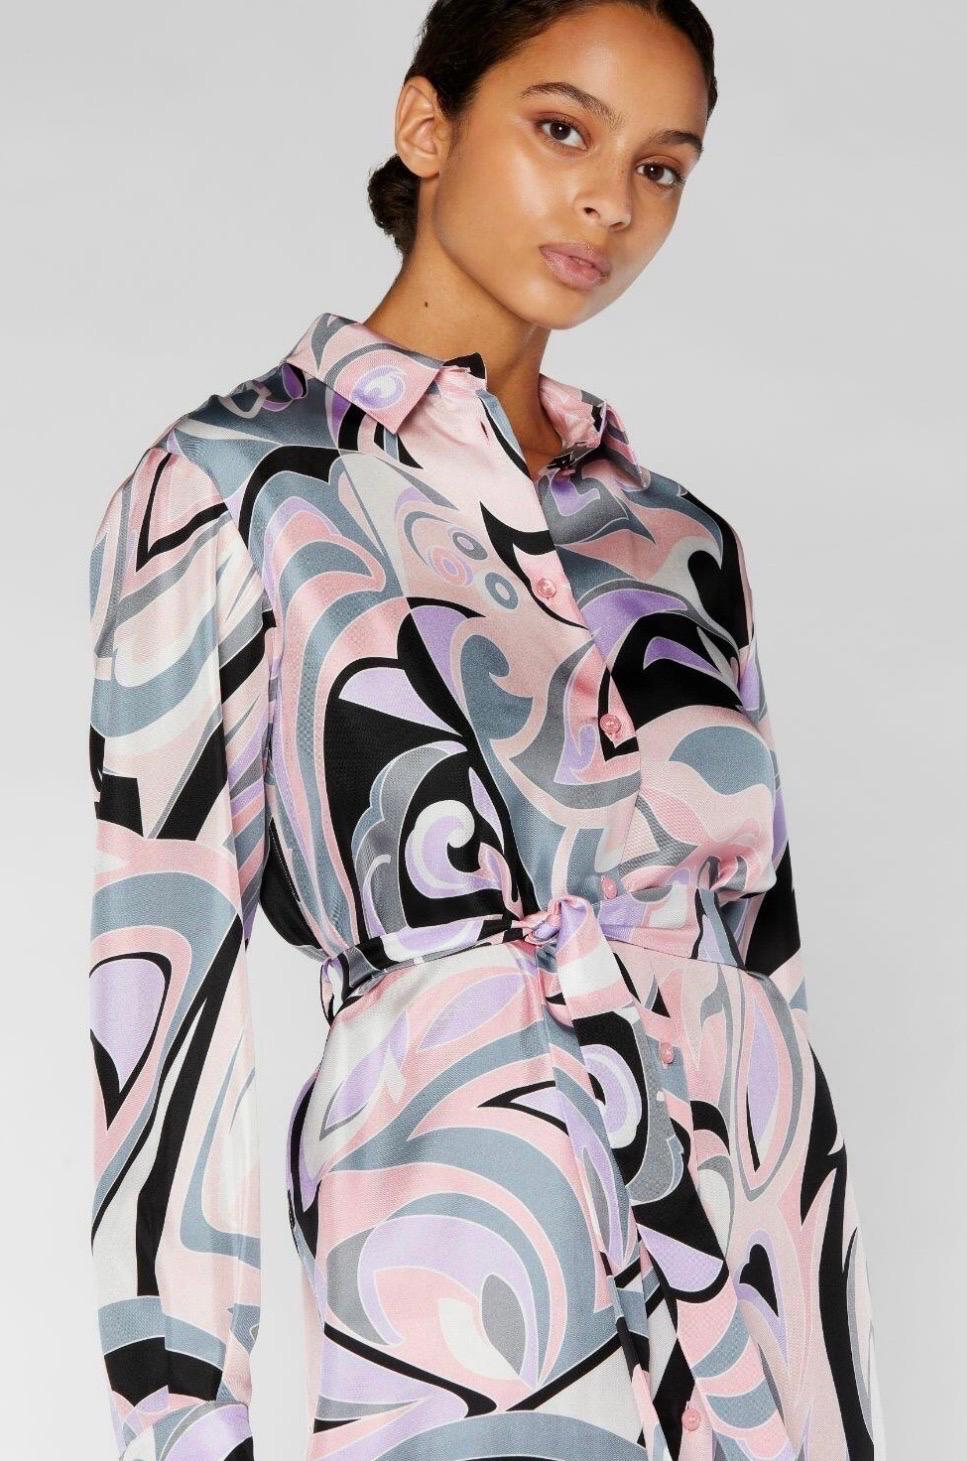 NEW Emilio Pucci Signature Print Silk Shirt Dress with Belt 44 For Sale 6